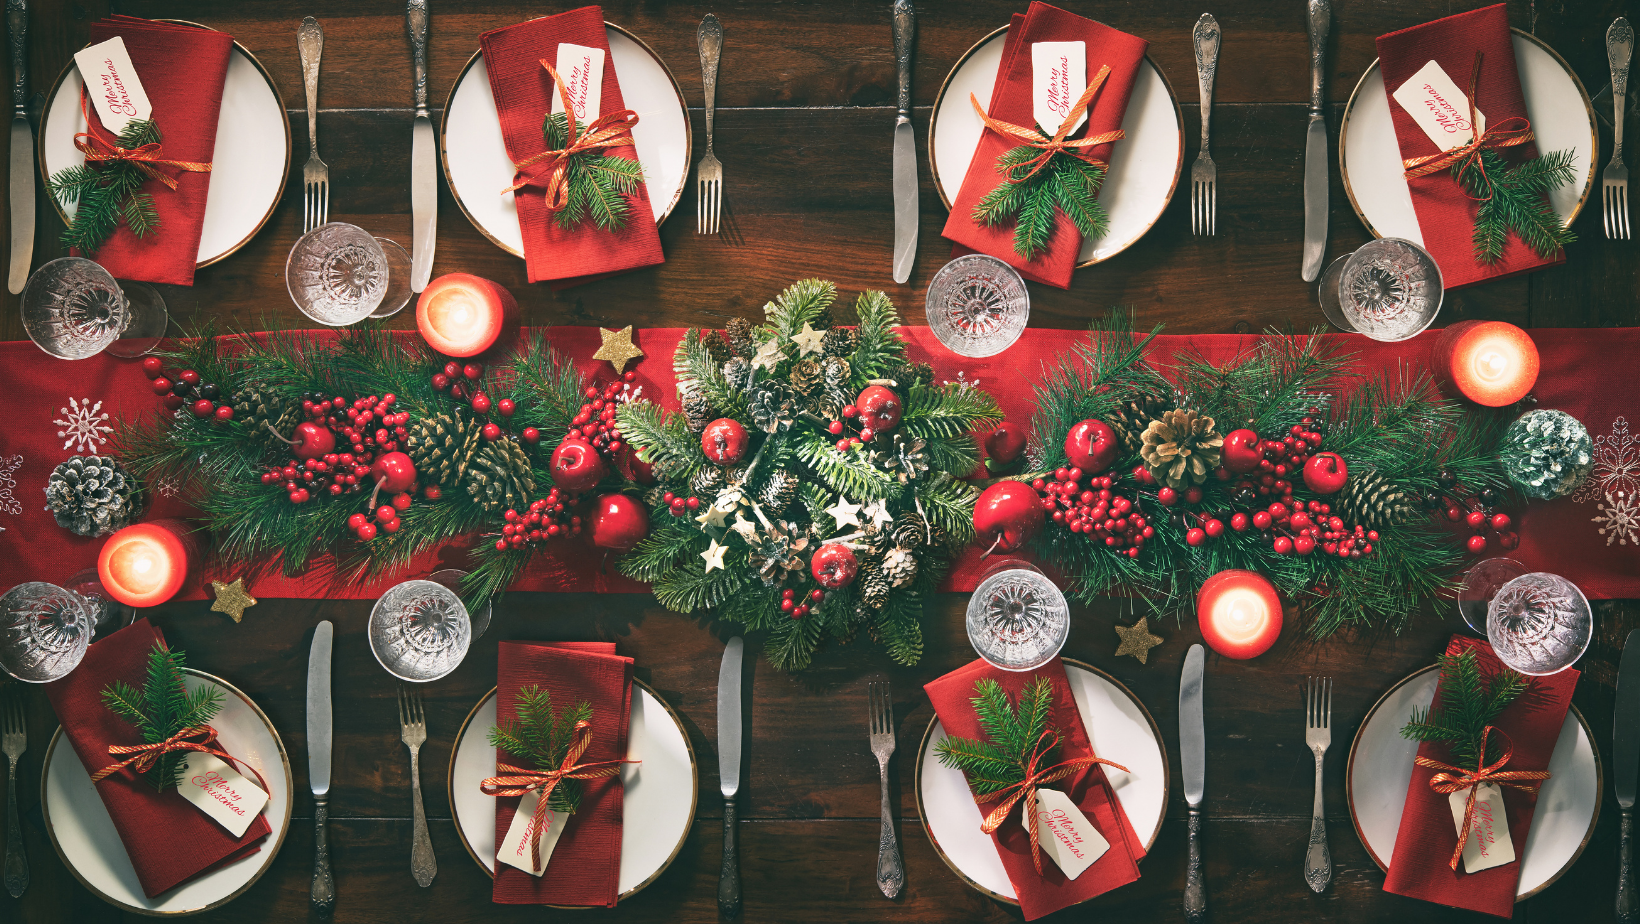 Hire An Event Planner for Your Holiday Party